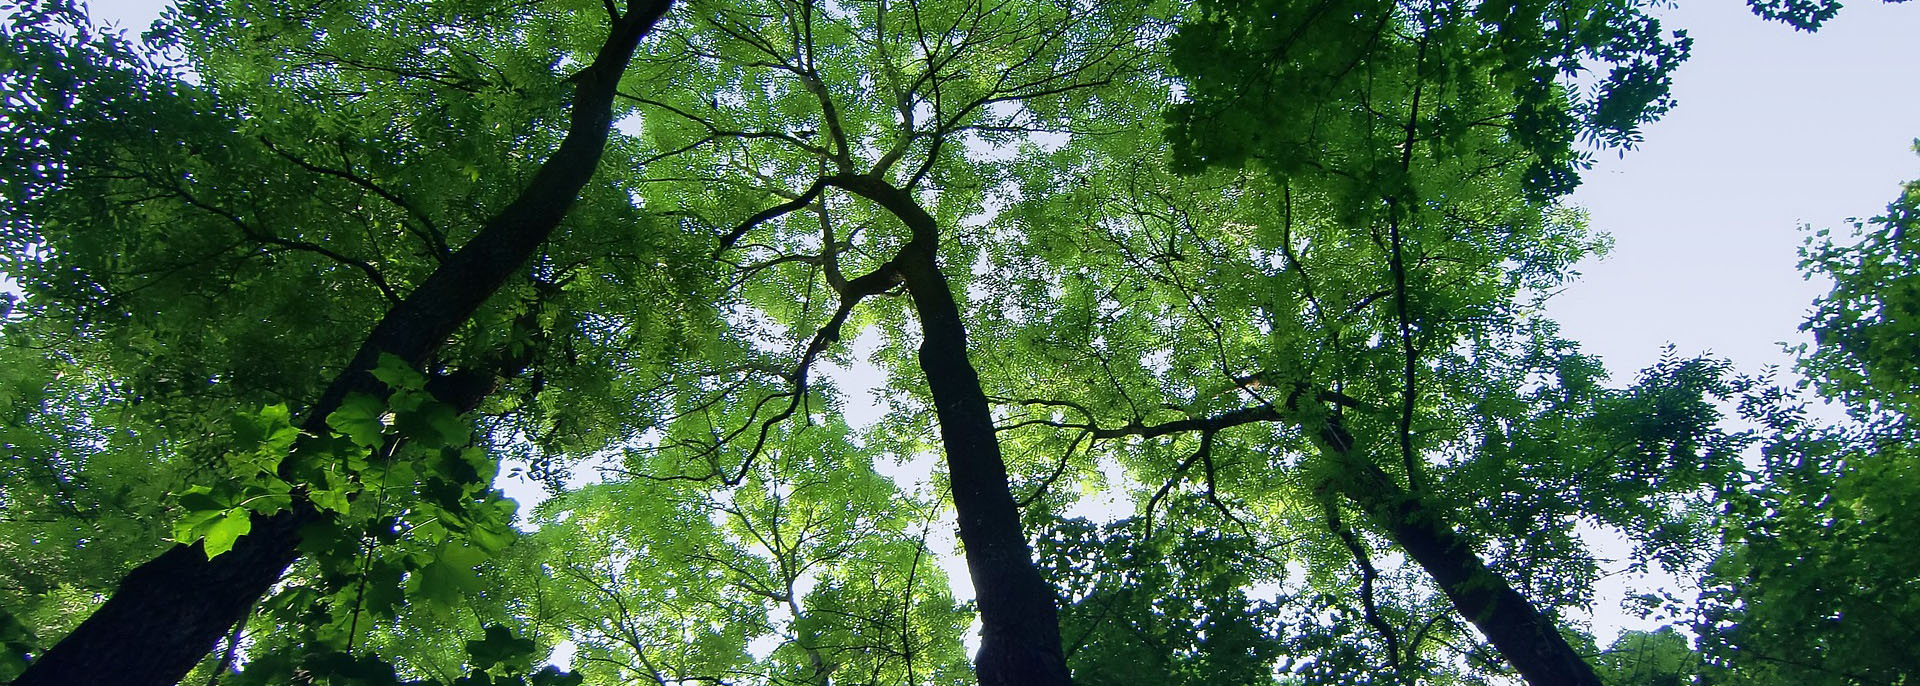 photo of trees from a vantage point of looking up at them